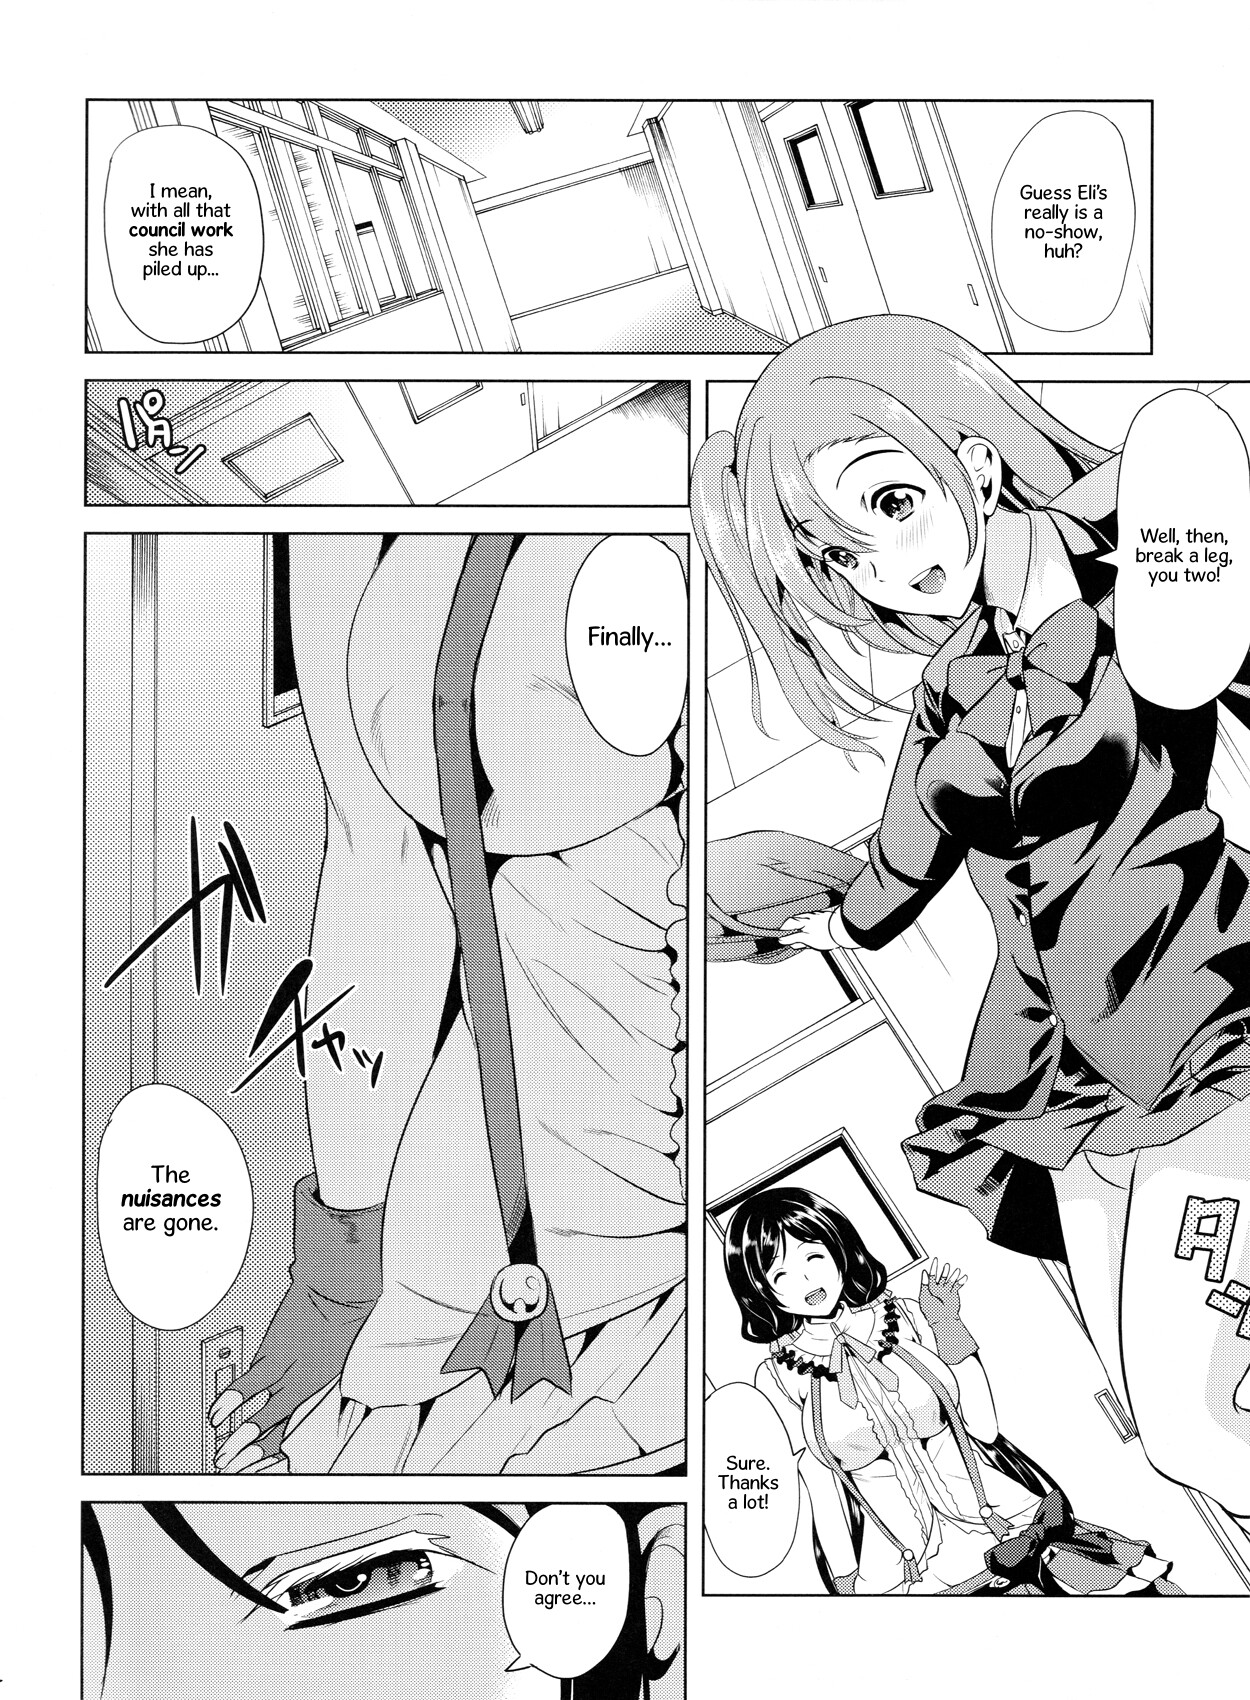 hentai manga I Want Elichi!! By Any and All Means...